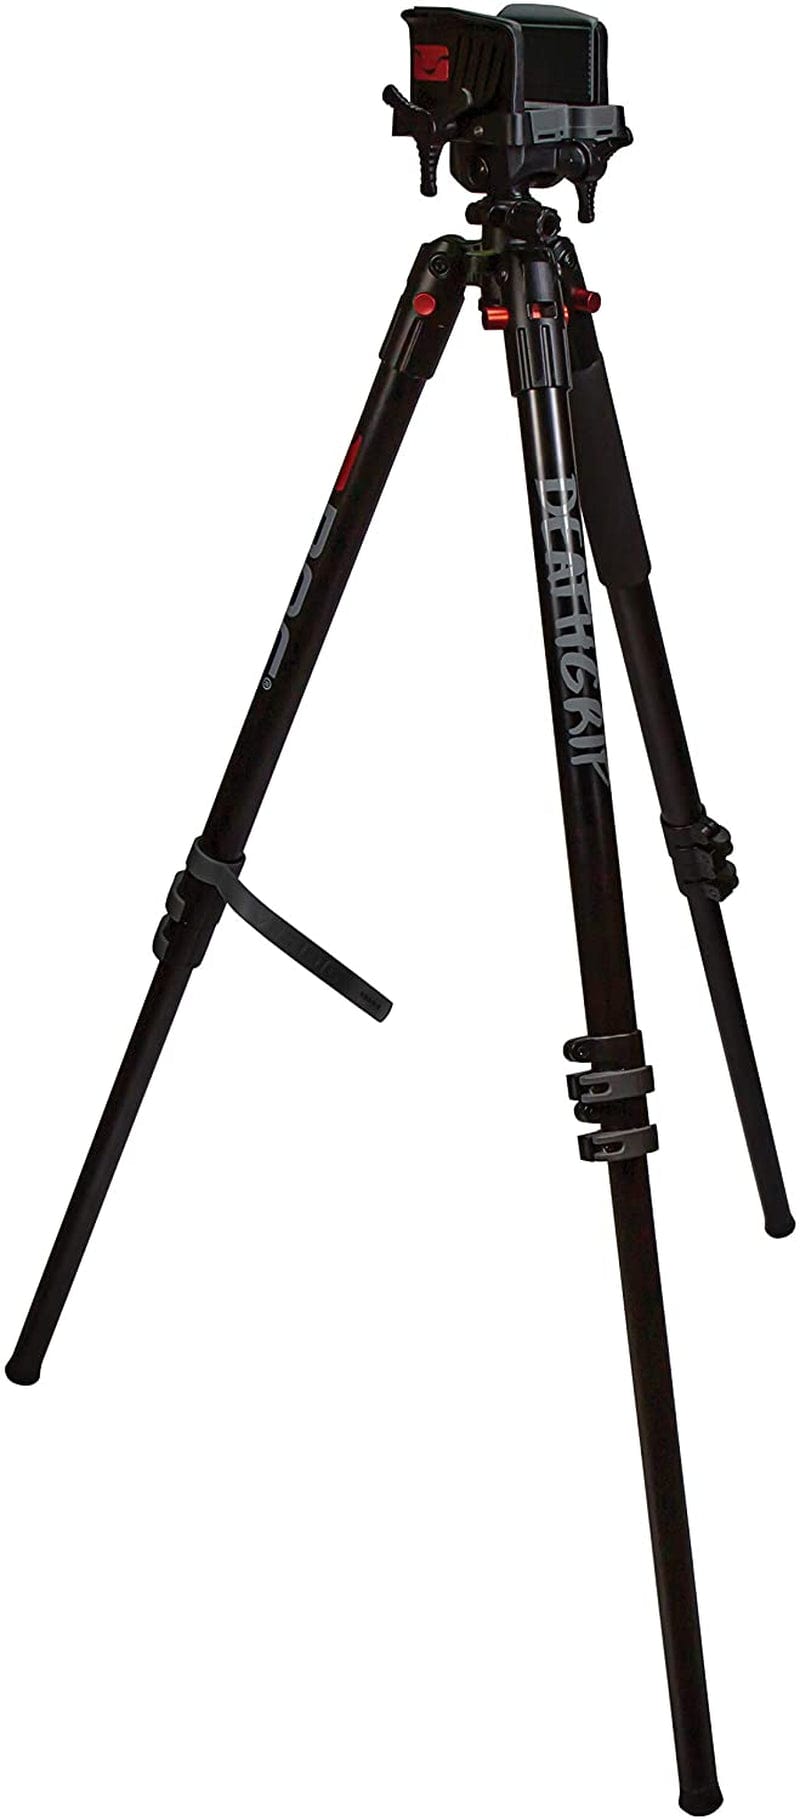 BOG Deathgrip Tripods with Durable Aluminum and Carbon Fiber Frames, Lightweight, Stable Design, Bubble Level, Adjustable Legs, and Hands-Free Operation for Hunting, Shooting, and Outdoors Sporting Goods > Outdoor Recreation > Winter Sports & Activities BOG Aluminum Tripod 